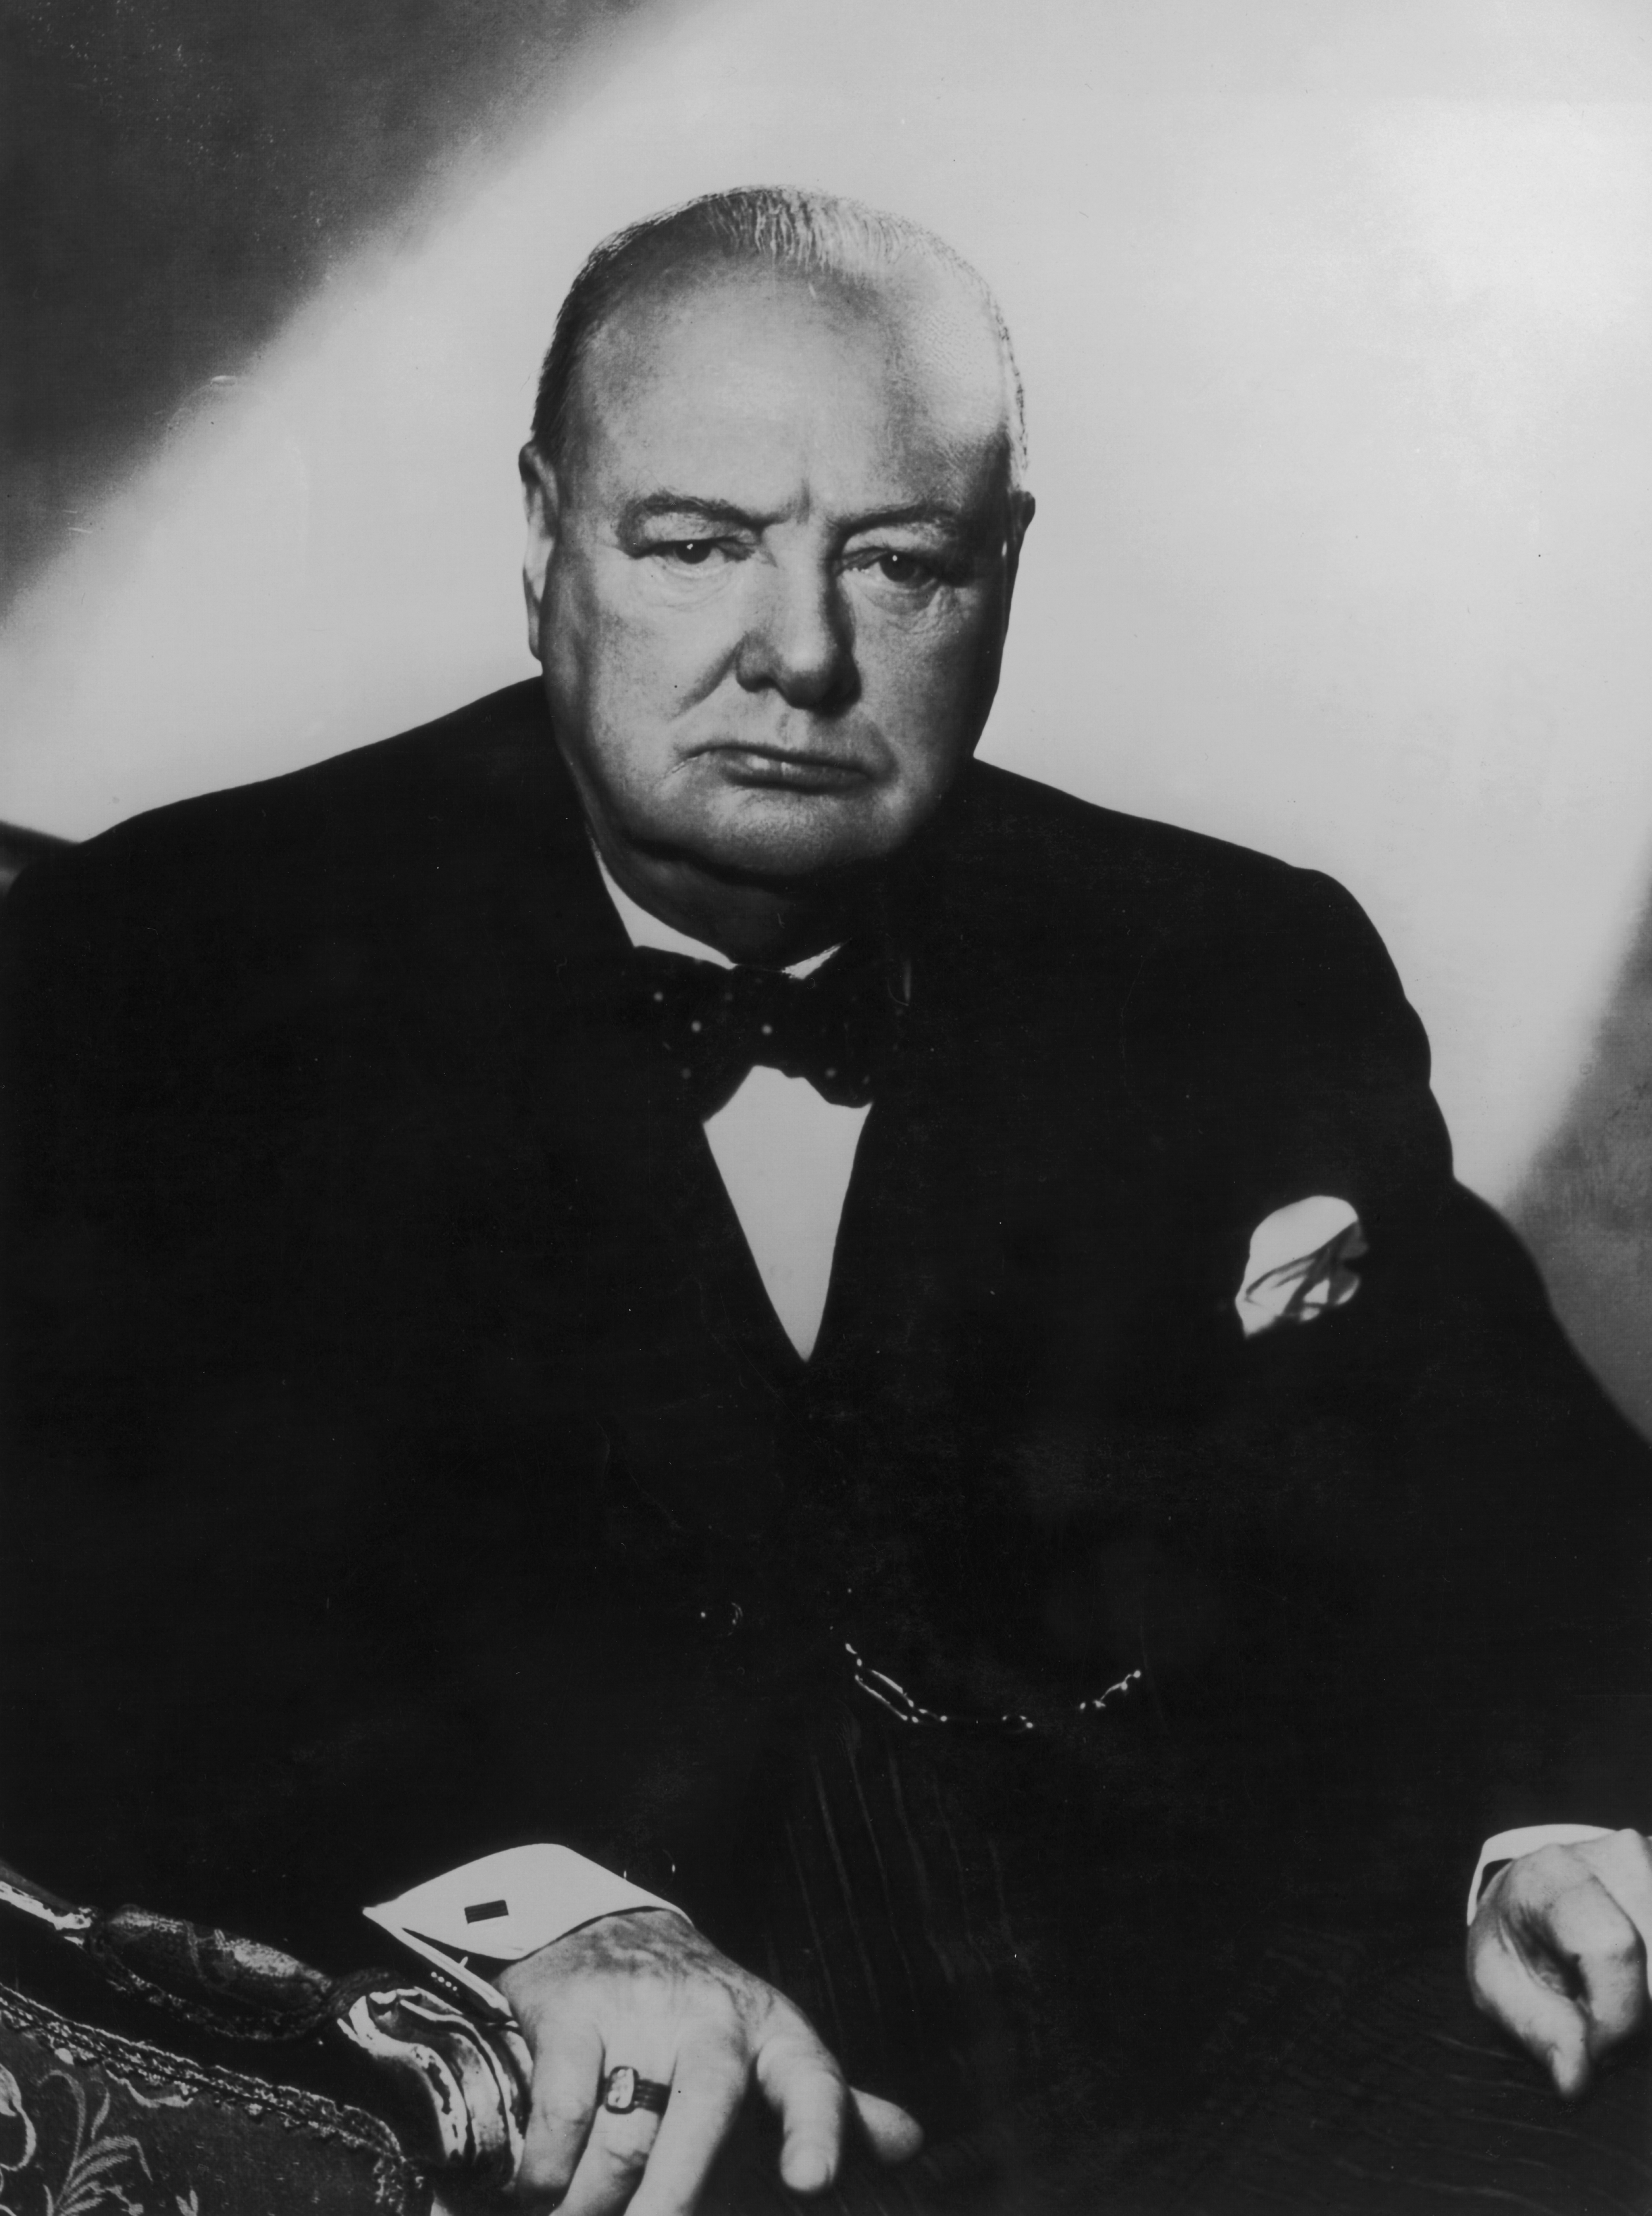 Portrait of Winston Churchill in a formal suit with a bow tie and pocket square